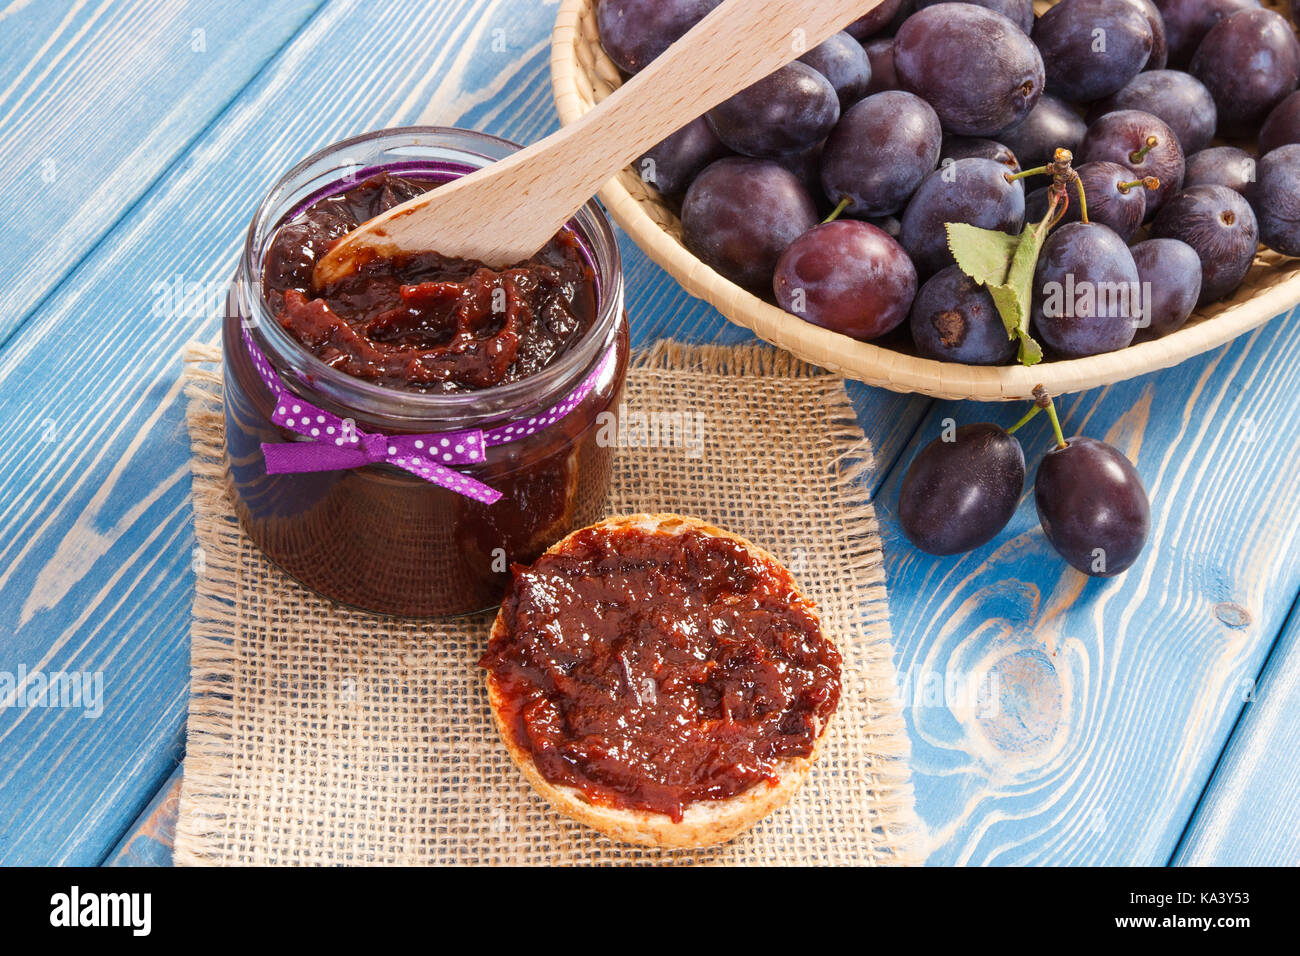 Wooden knife and plum marmalade or jam for preparing sandwiches, concept of healthy sweet snack or dessert Stock Photo